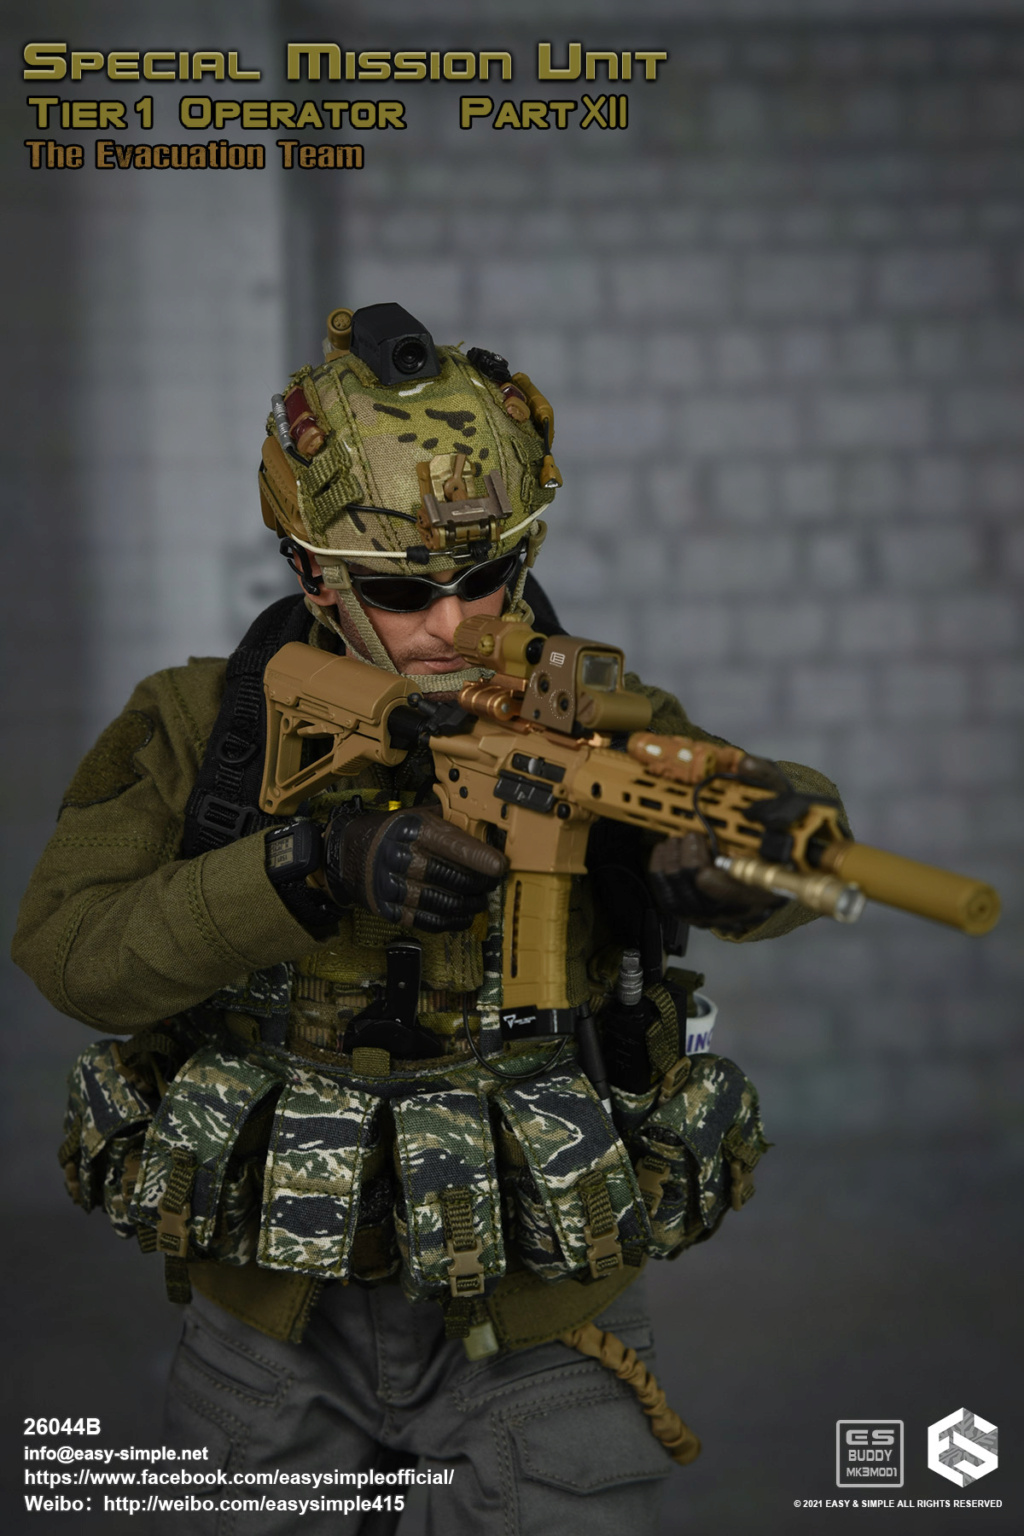 SpecialMissionUnit - NEW PRODUCT: Easy&Simple: 26044B Special Mission Unit Tier1 Operator Part XII The Evacuation Team 4dac3d10